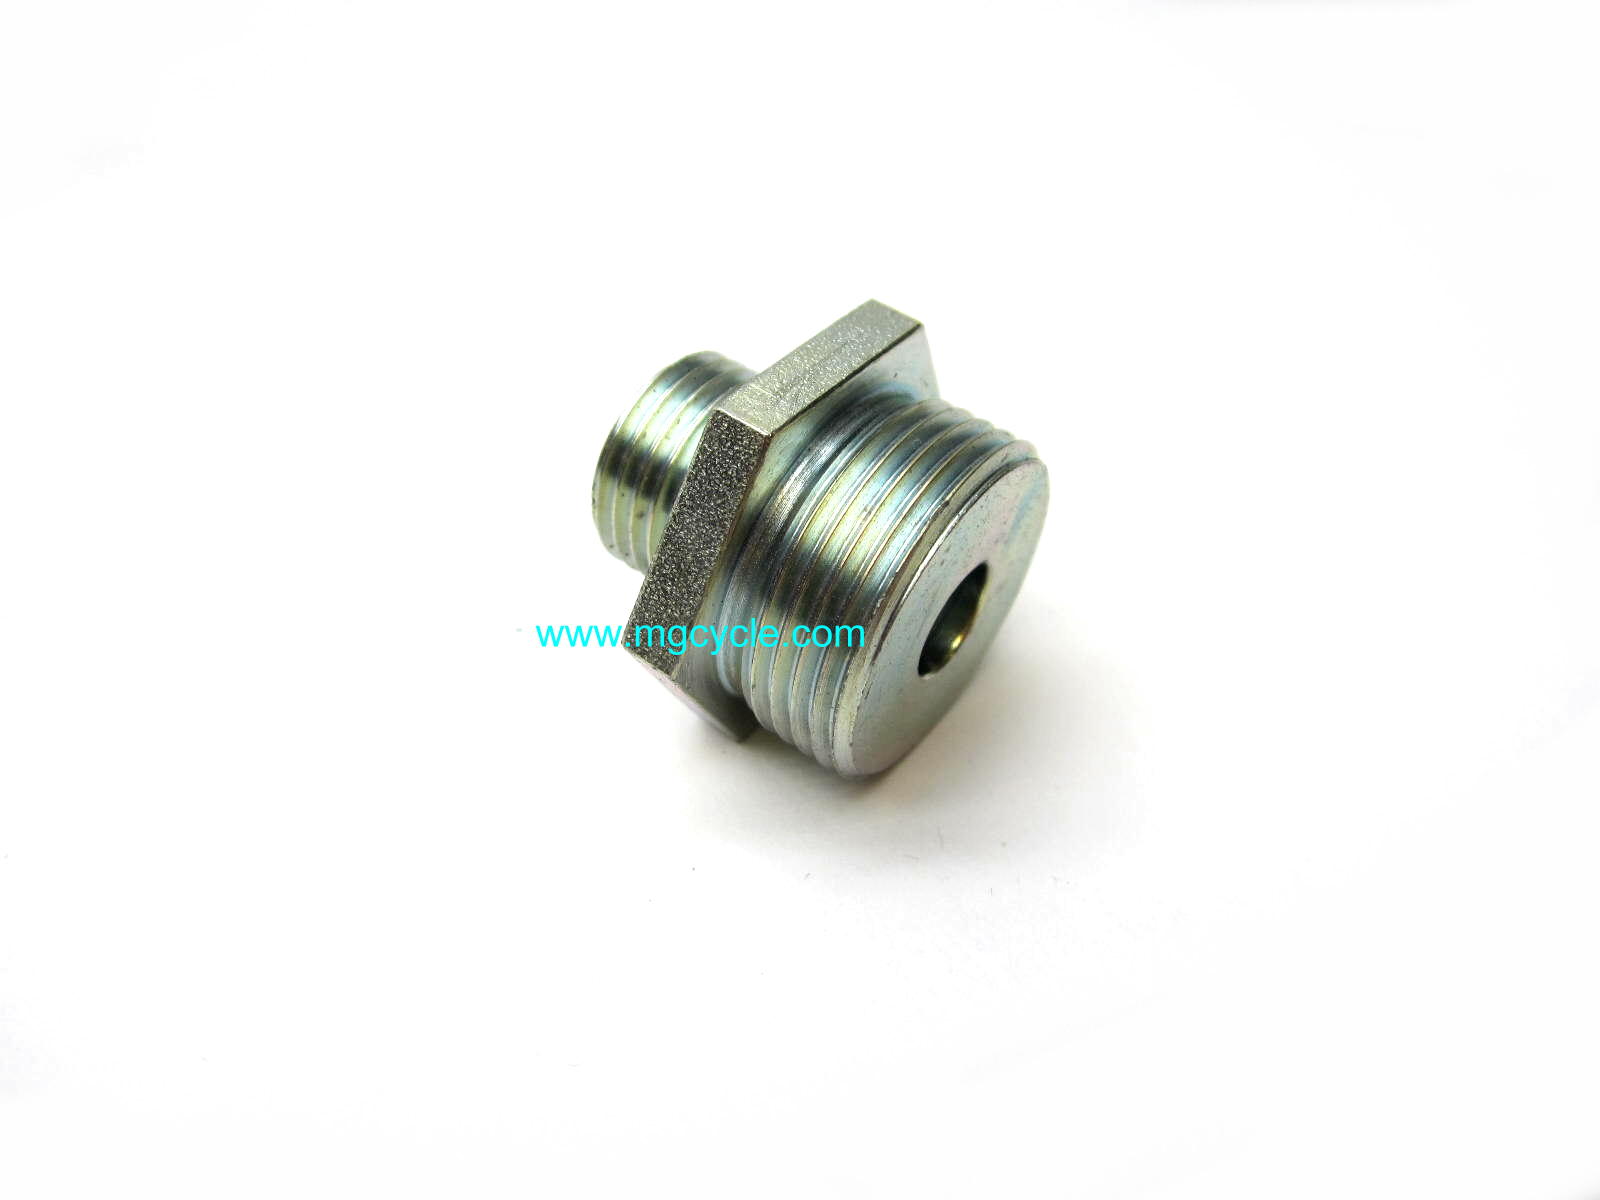 Oil filter threaded adapter 1975-1993 big twins GU14003800 - Click Image to Close